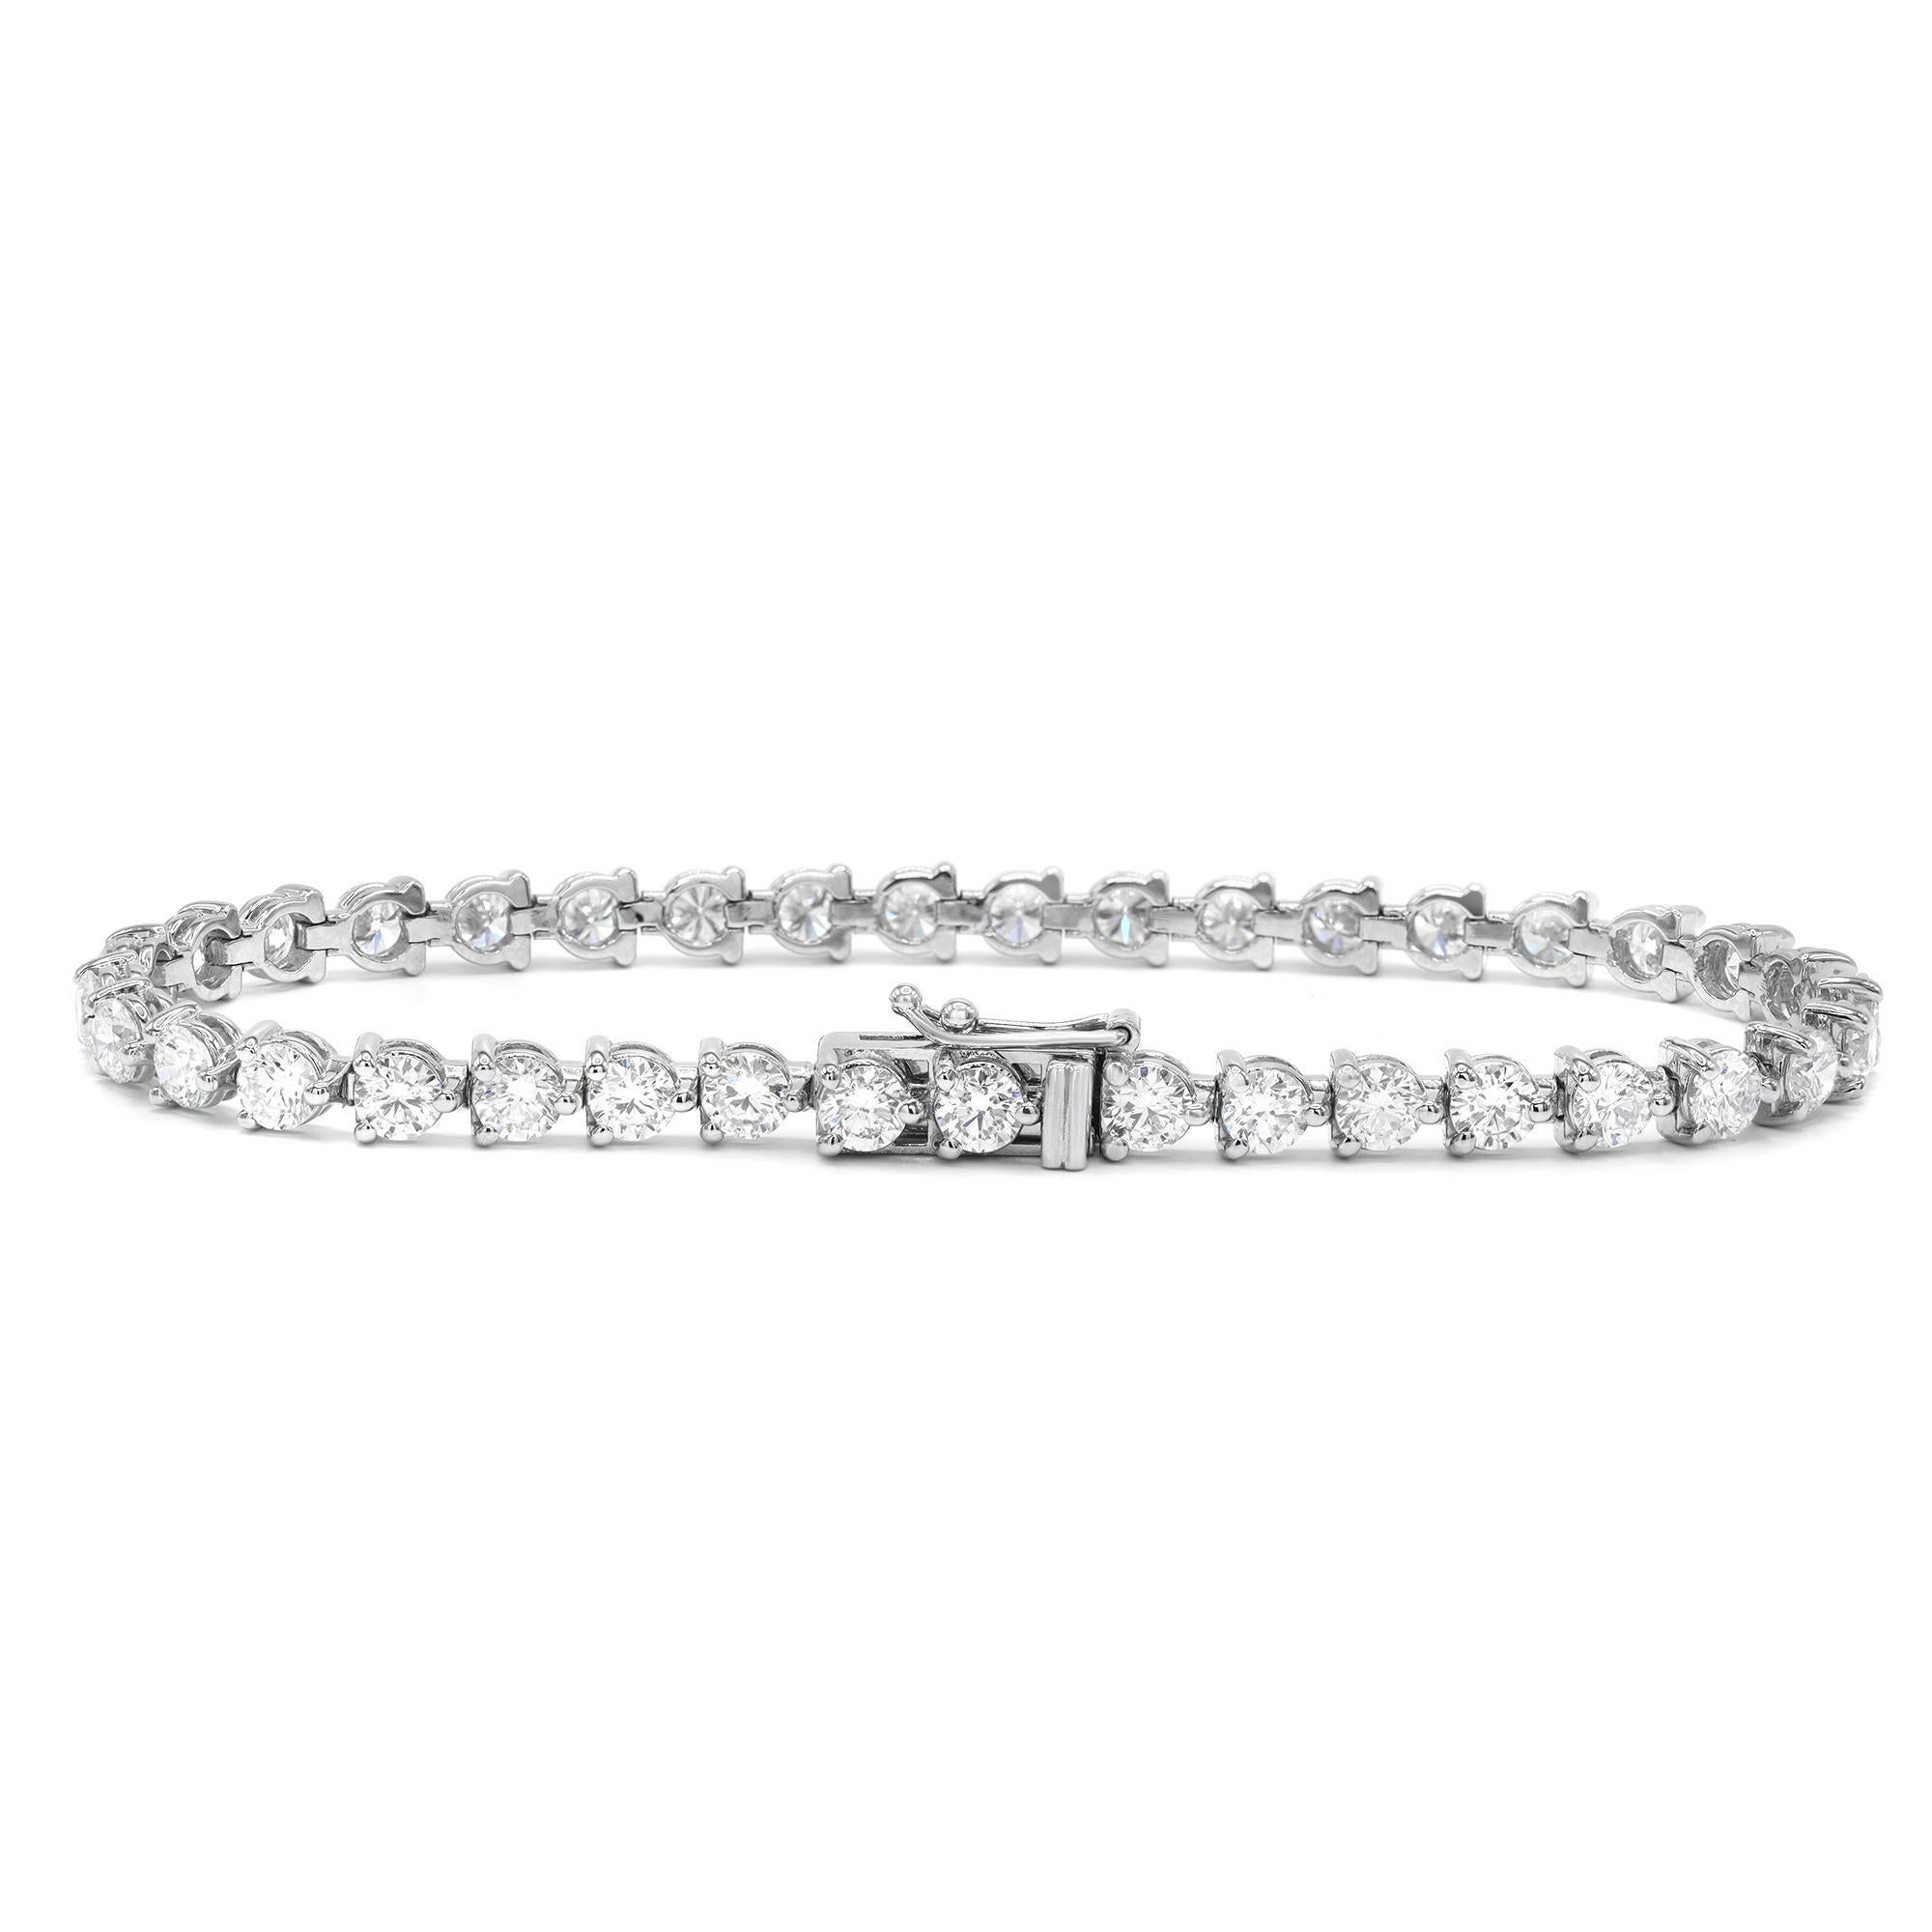 Classic yet elegant, this breathtaking tennis bracelet is crafted in 14K white gold with 37 prong set dazzling round cut diamonds. Three prong setting. The total diamond carat weight is 7.03 with each diamond size 3.7 mm. The bright white diamonds